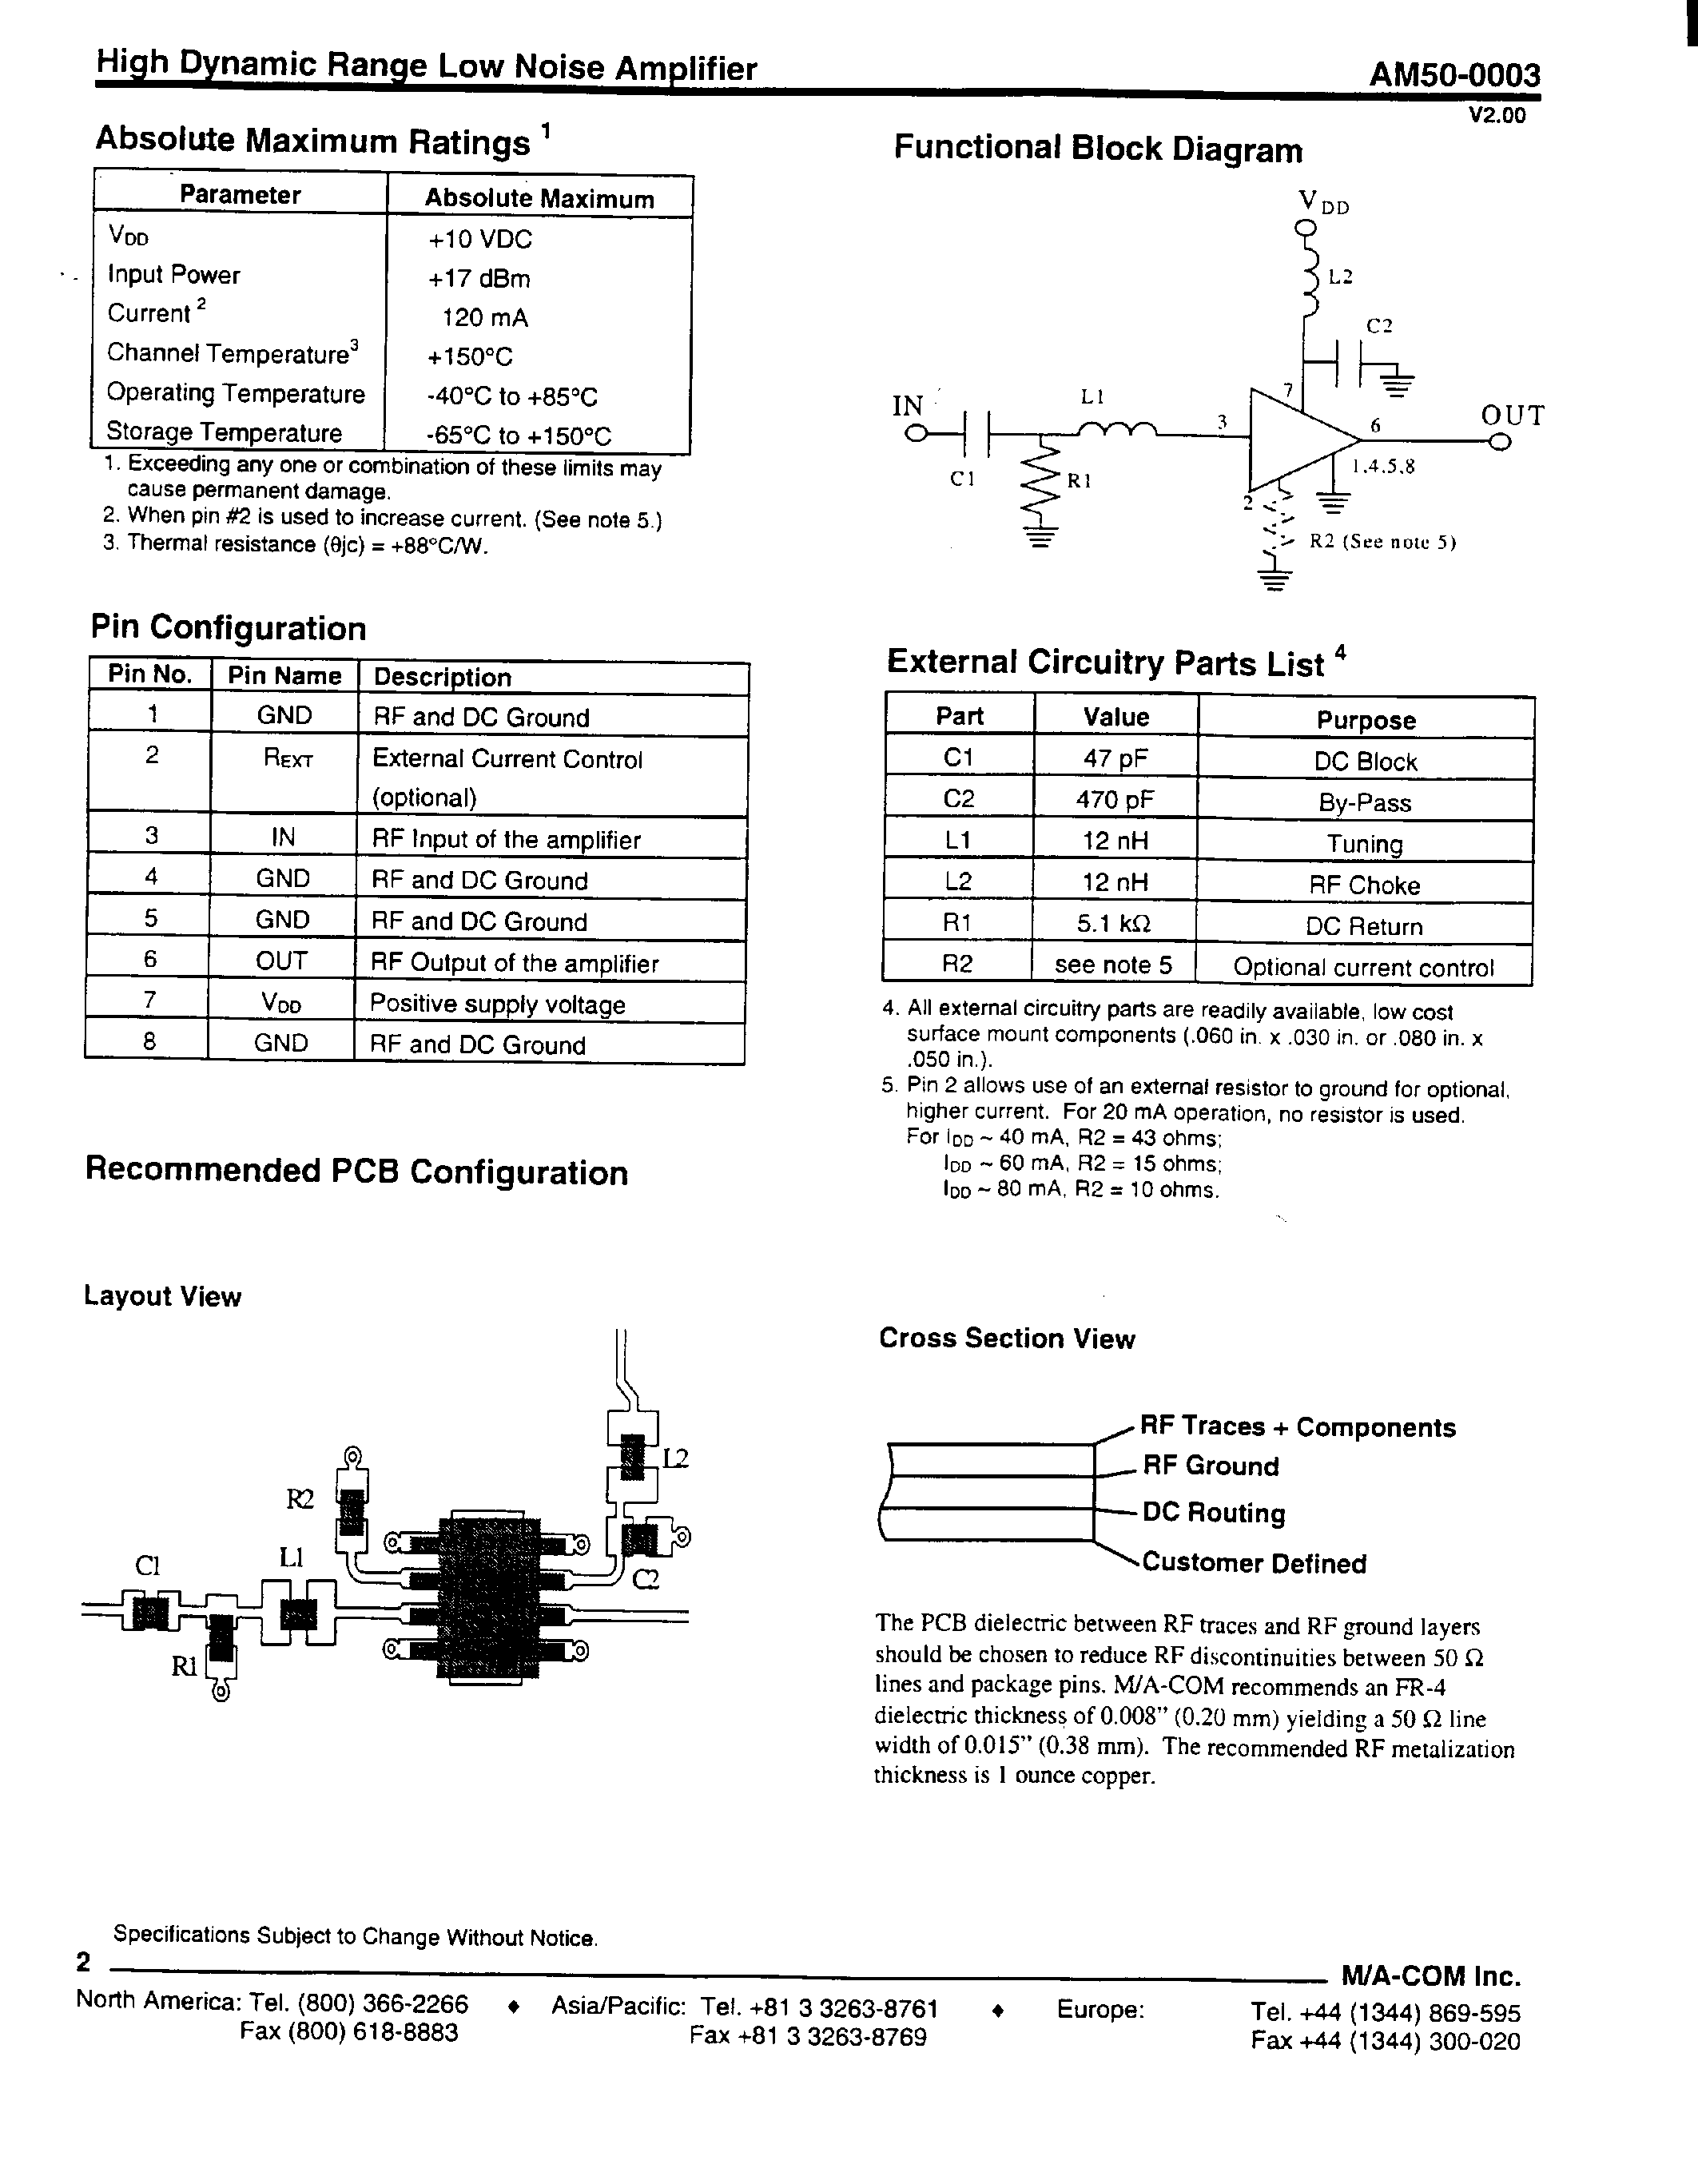 Datasheet AM50-0003 - High Dynamic Range Low Noise Amplifier 800-1000 MHz page 2